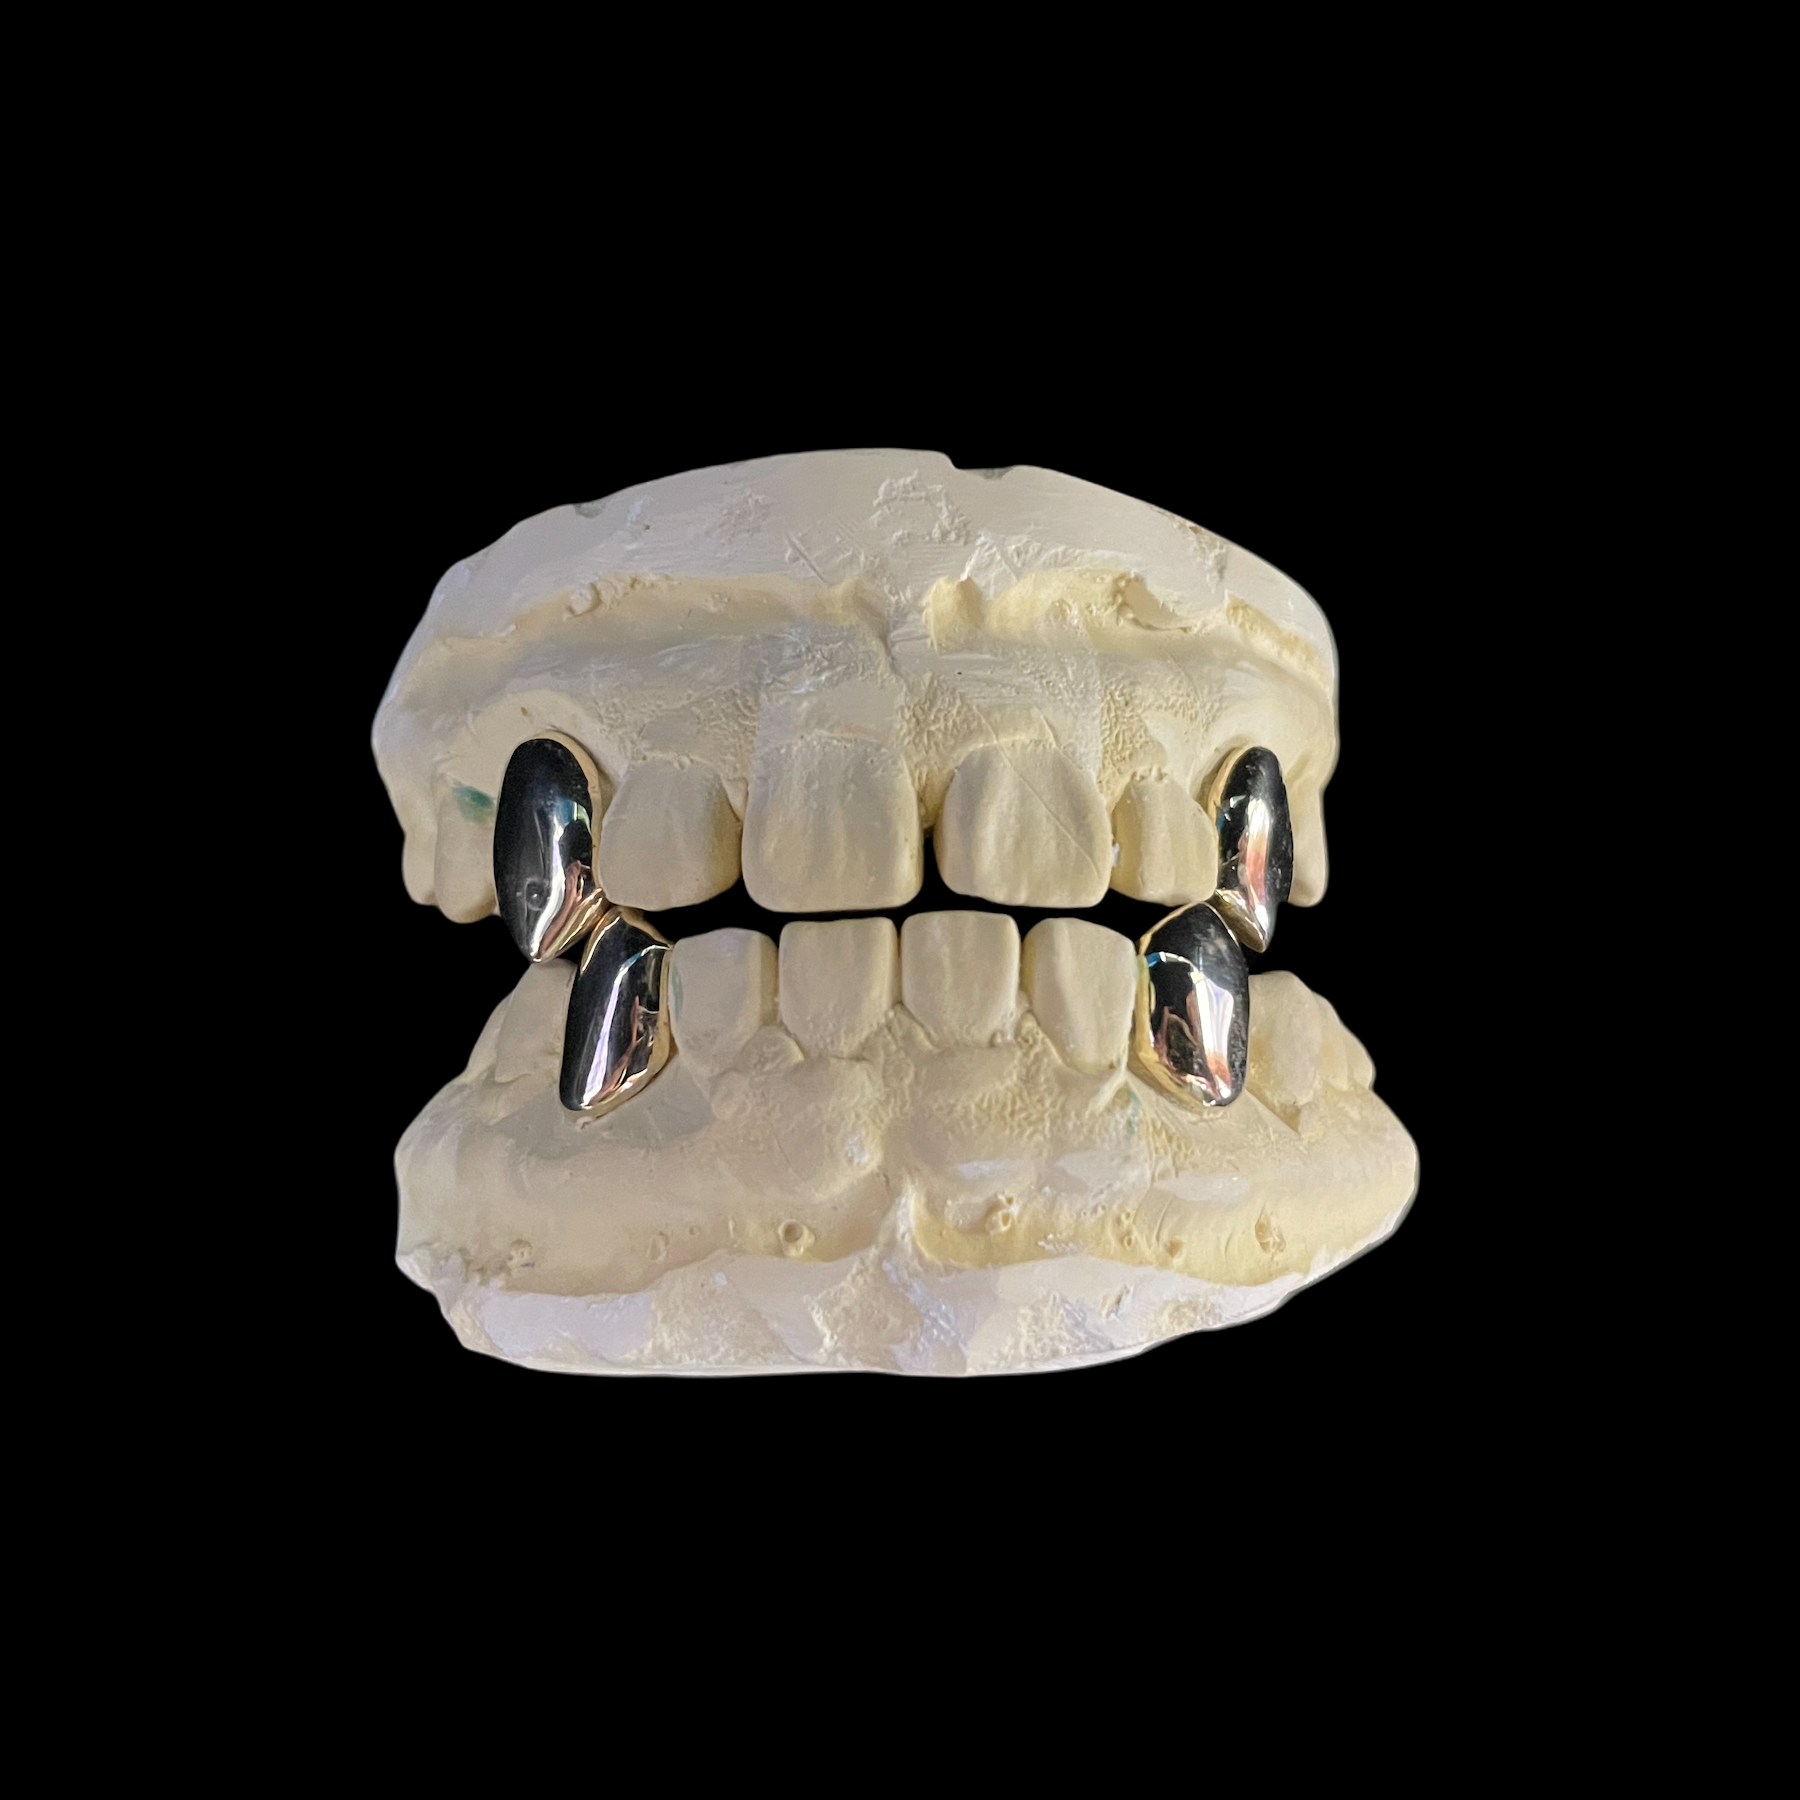 10k vs 14k Gold Grillz: What Is Difference Between Both the Karats?